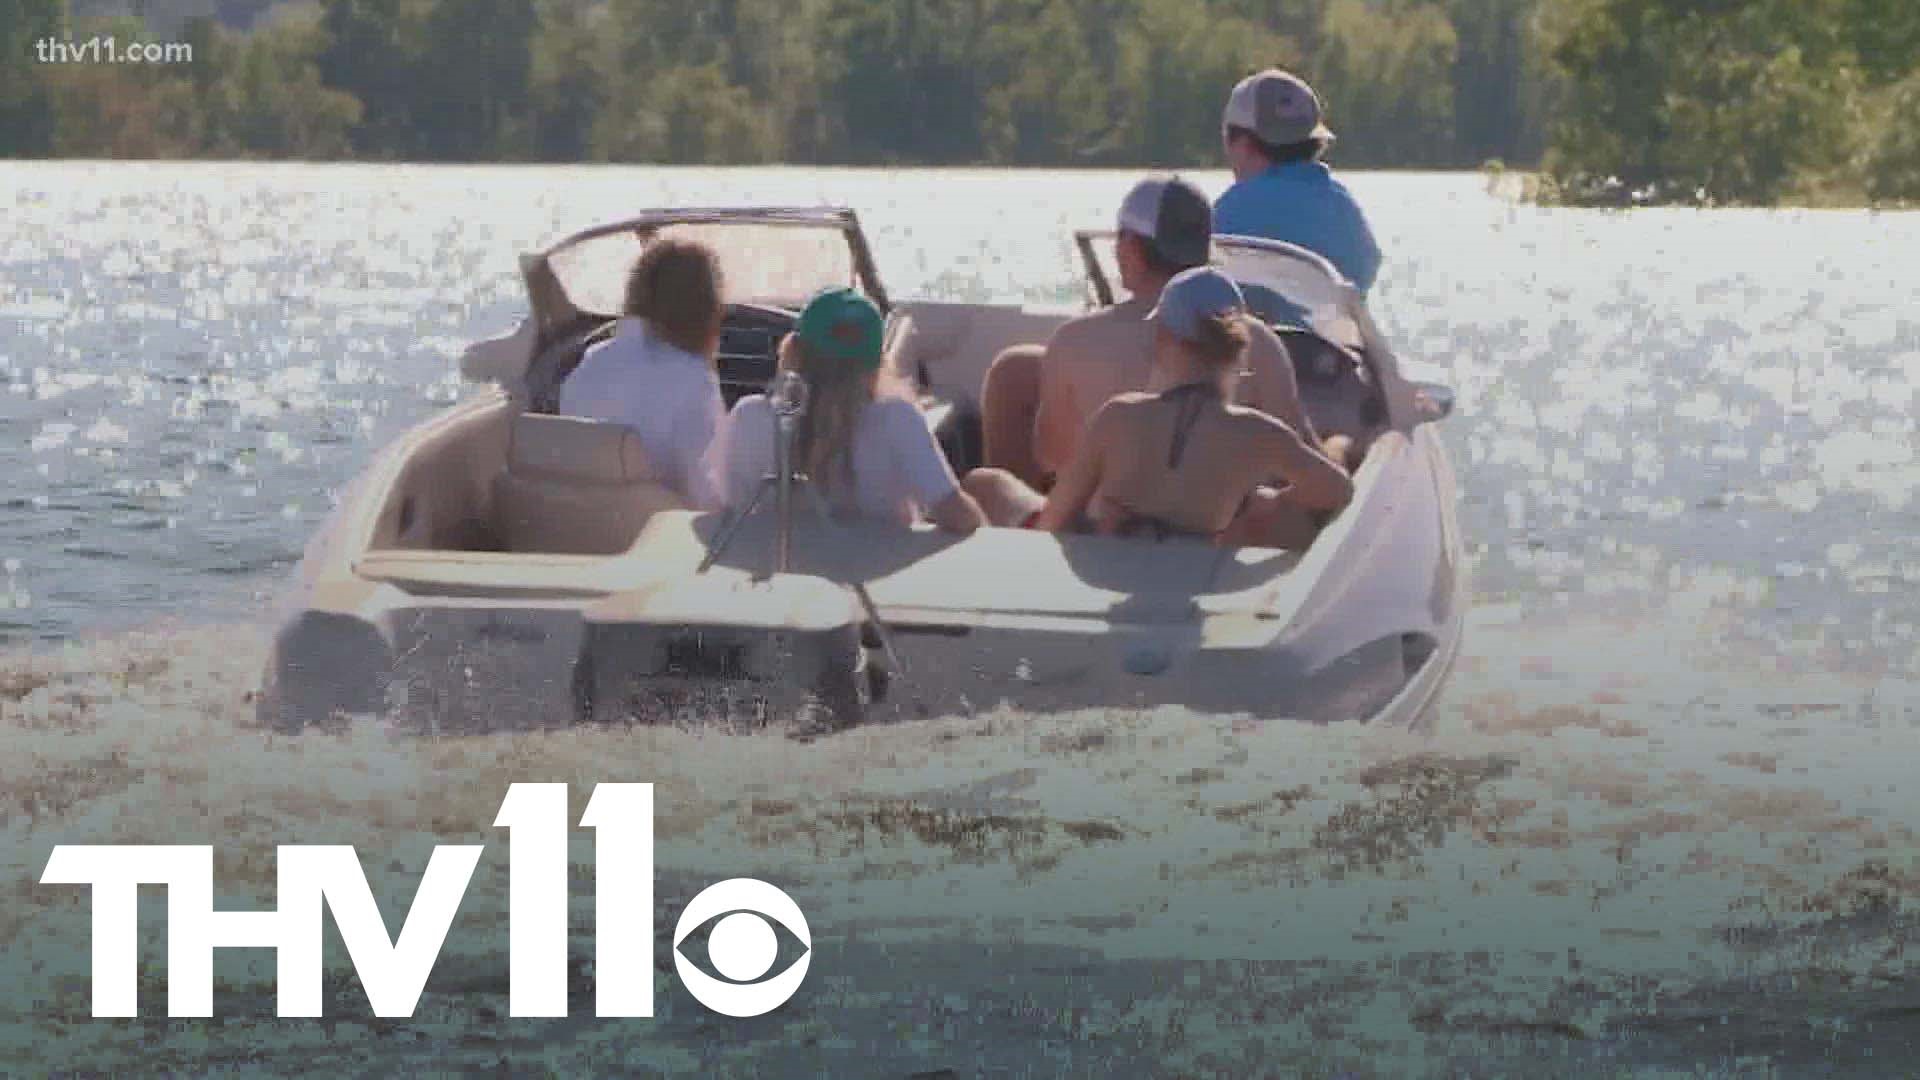 It's Memorial Day Weekend and a lot of people are planning to go onto the water, but officials are urging safety ahead of those trips.